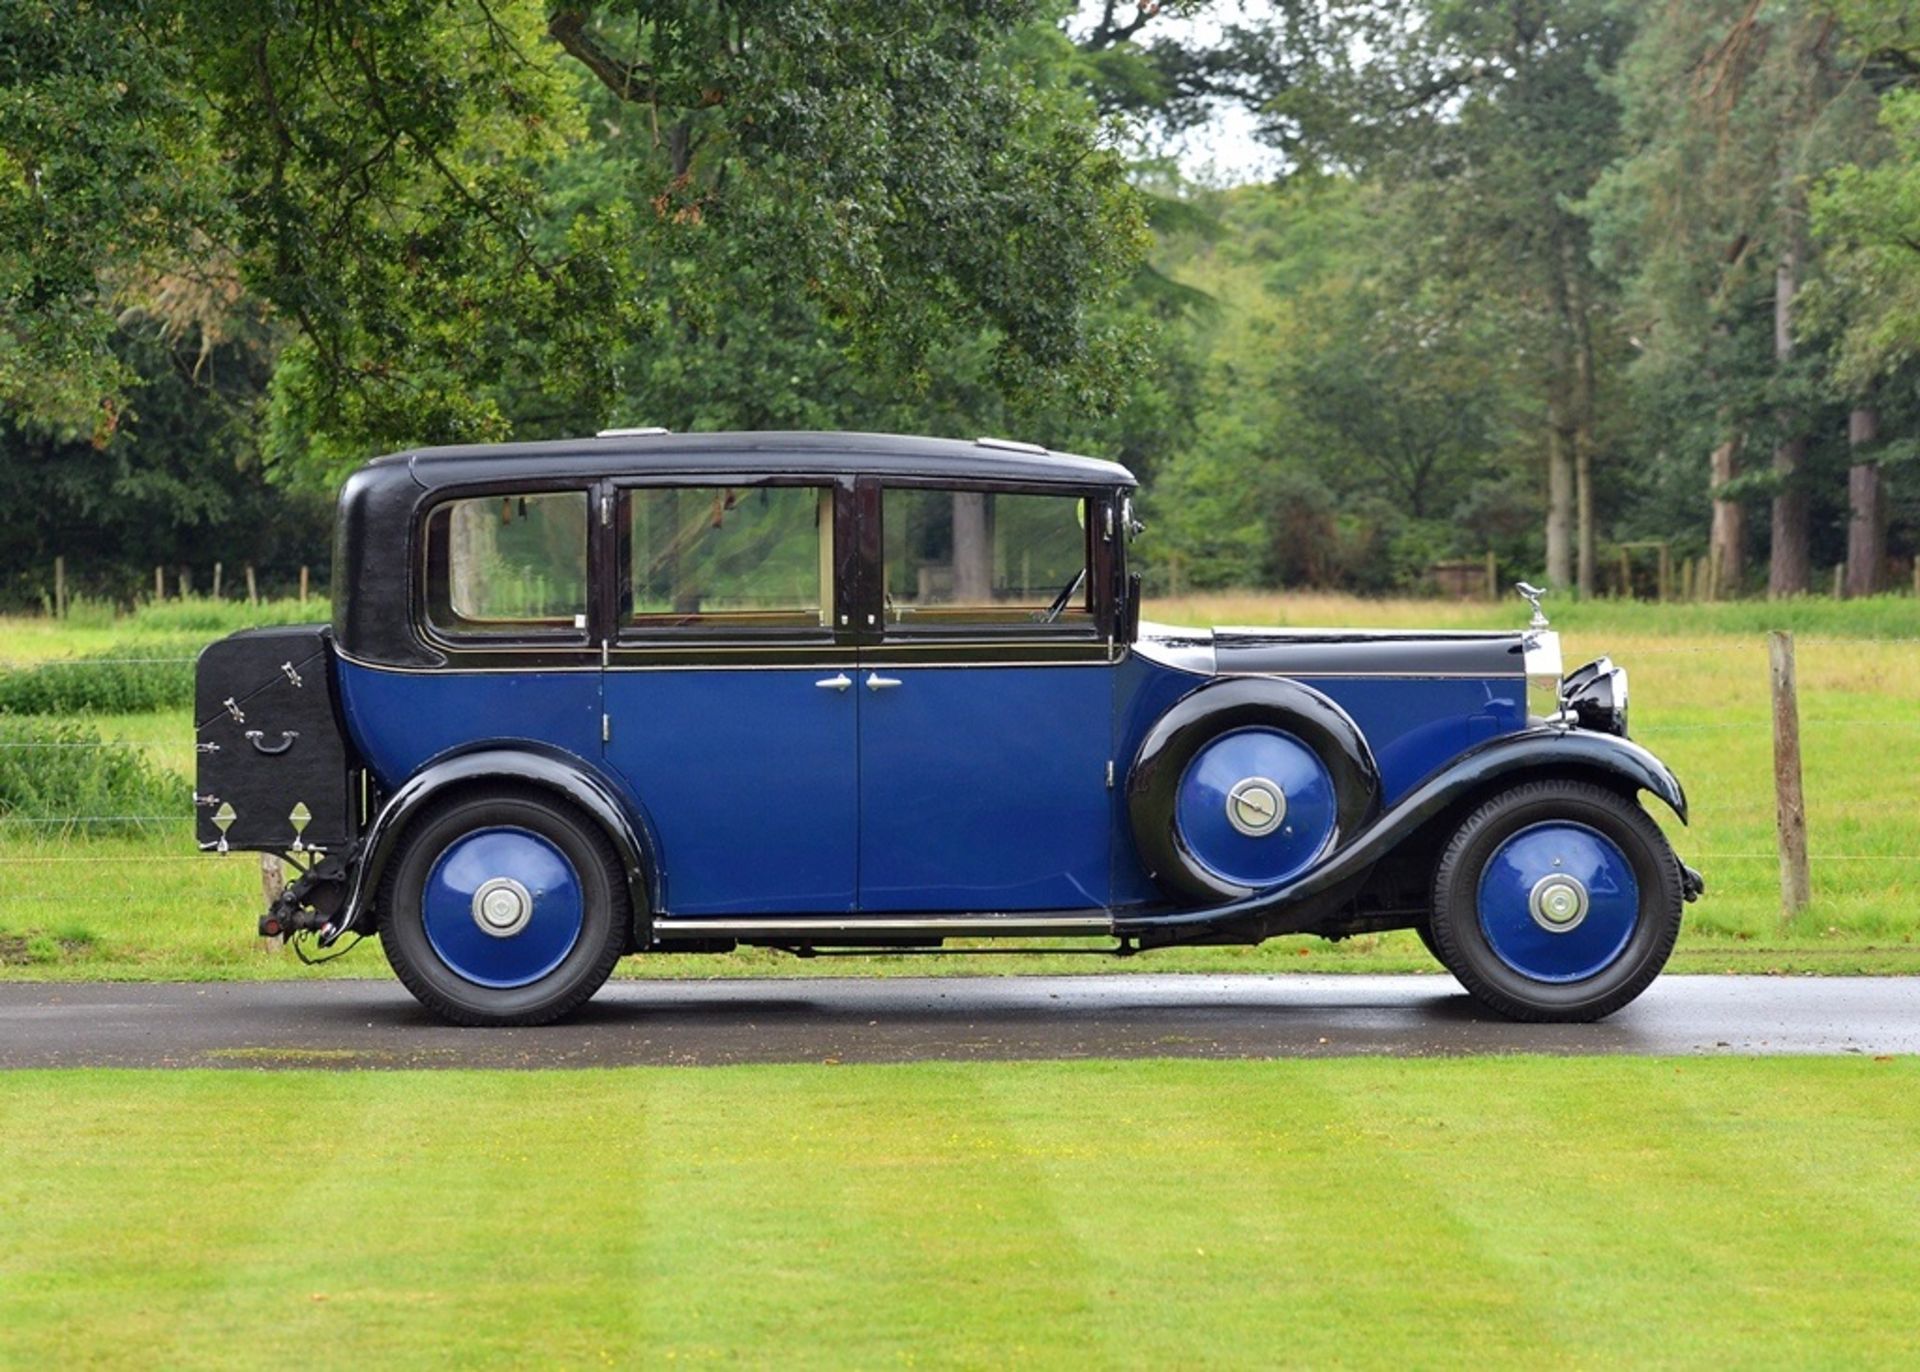 1932 Rolls-Royce 20/25 Limousine by Crosbie & Dunn - Image 2 of 16